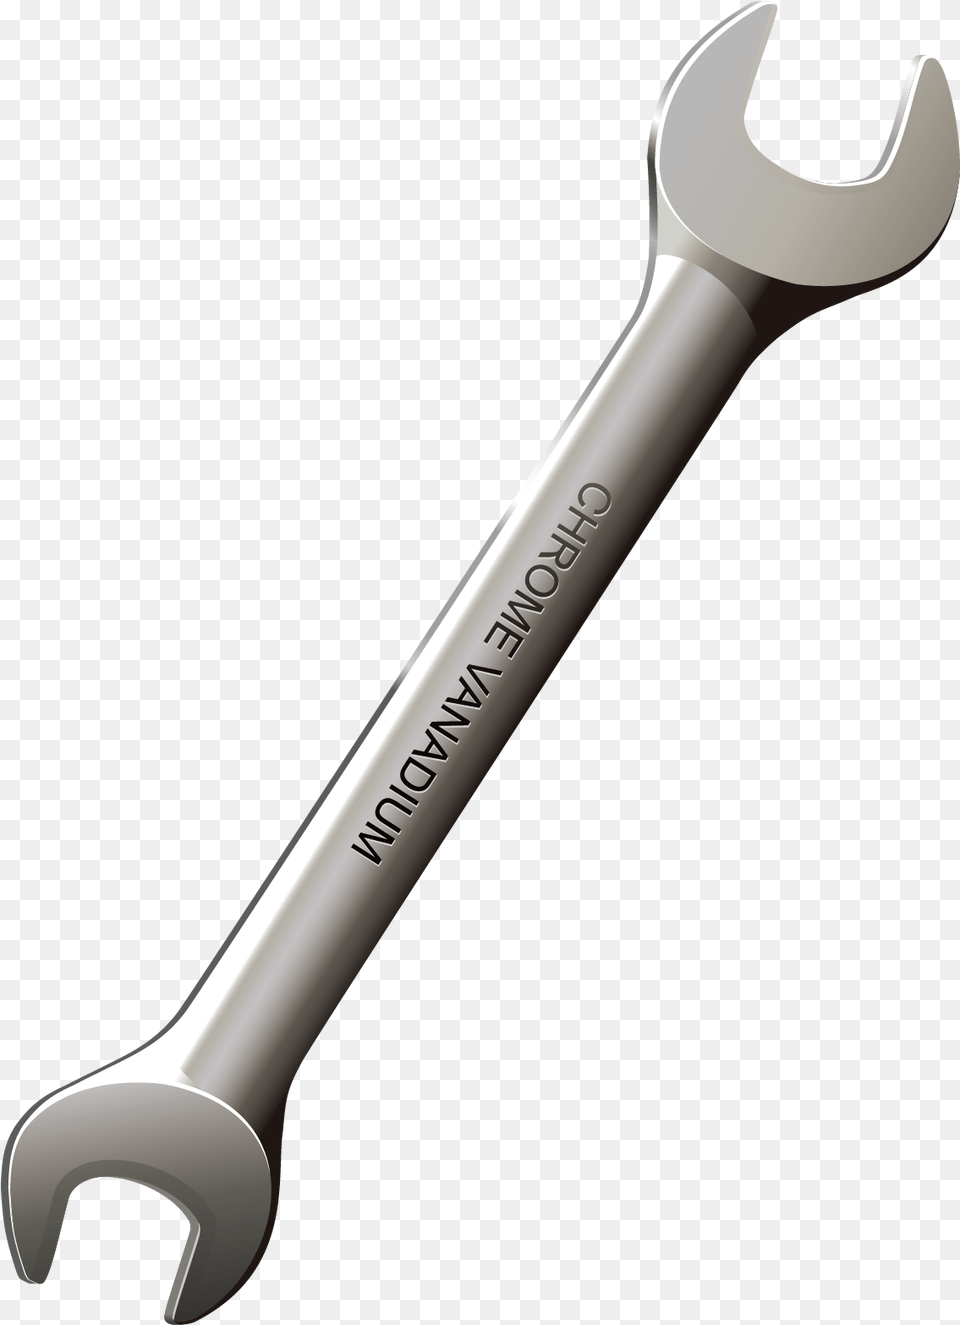 Wrench Adjustable Spanner Tool Key Wrench, Smoke Pipe Png